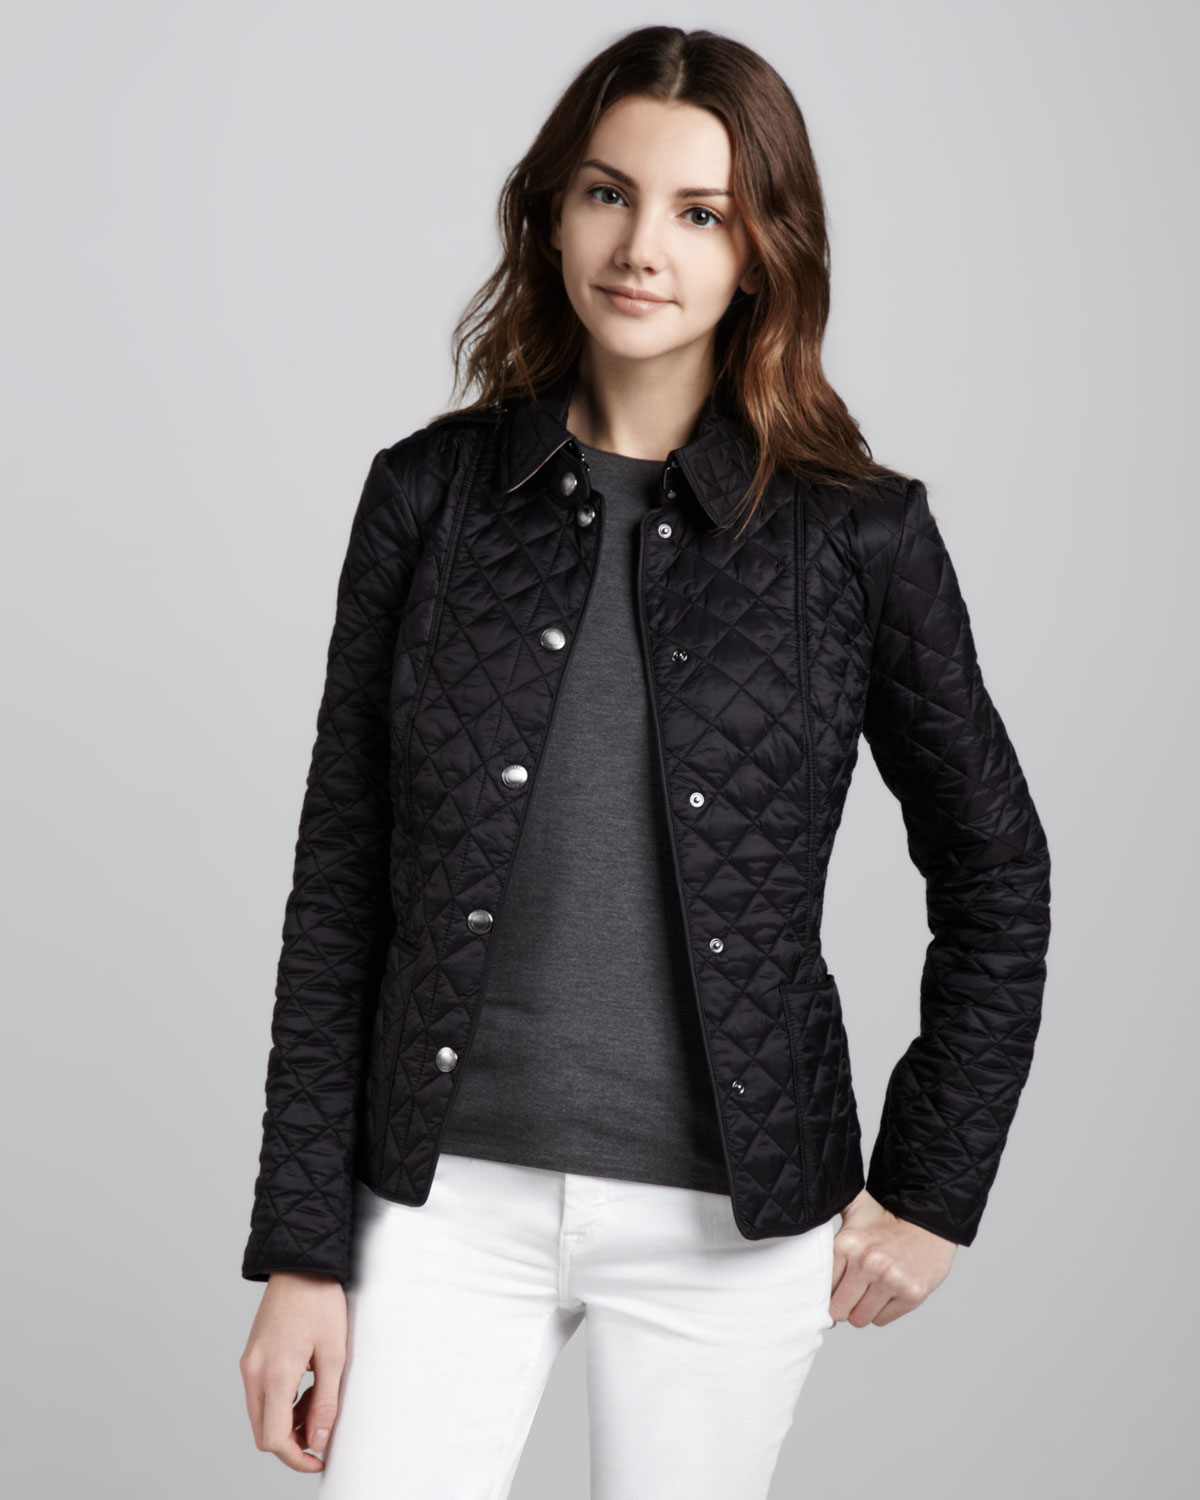 Lyst - Burberry Brit Heritage Quilted Jacket in Black